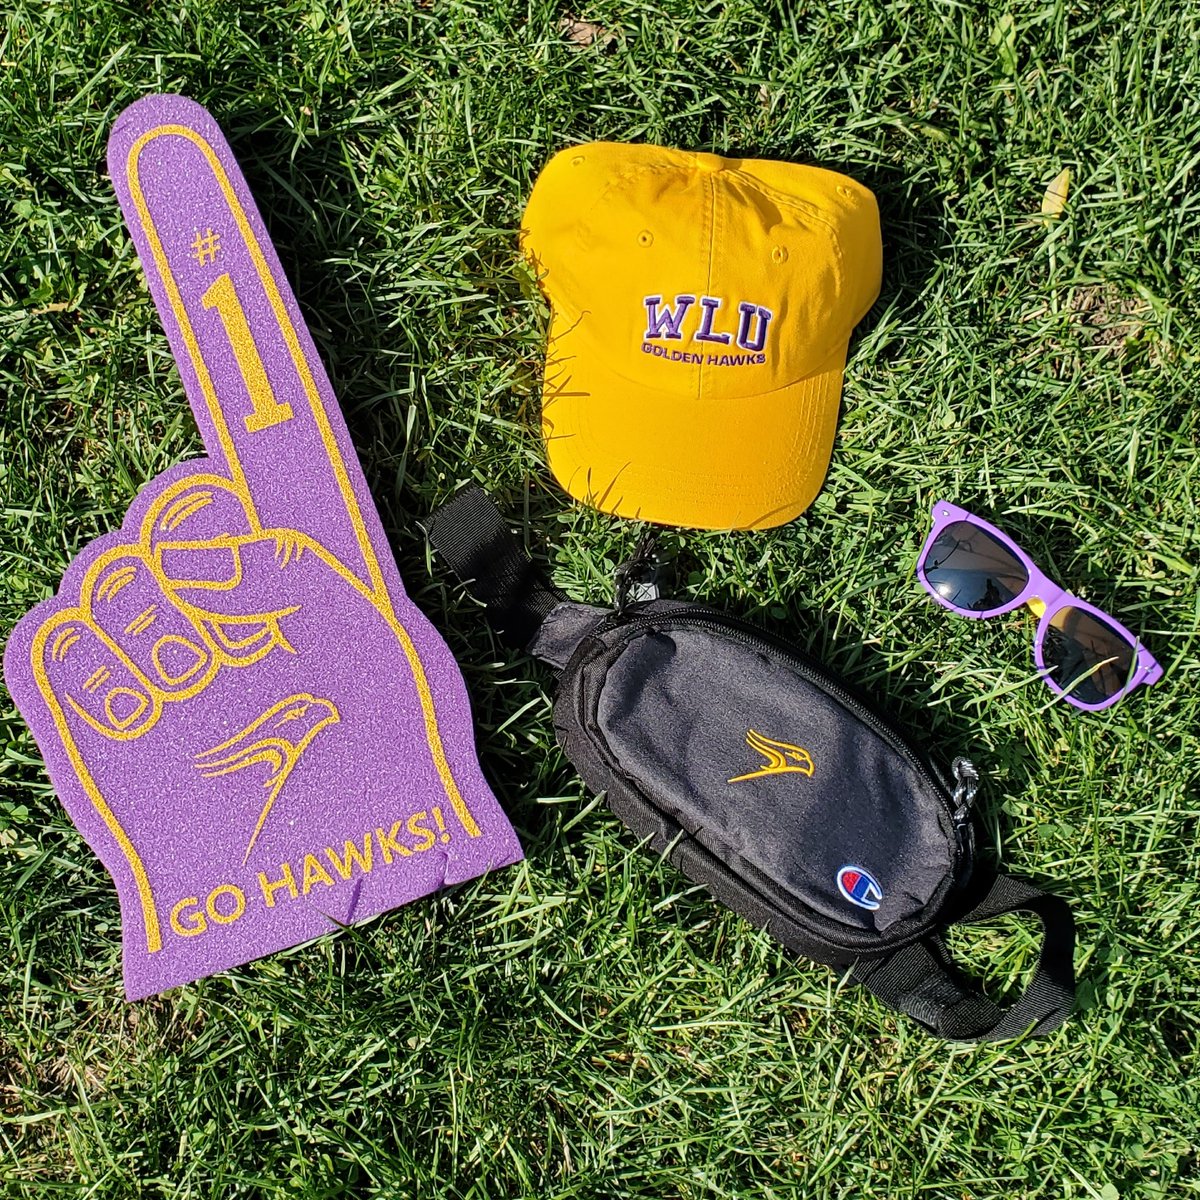 Homecoming countdown is on! Visit us in-store and grab some Homecoming accessories 💜💛 ‼️We expect high demand for our specialized homecoming merch. Start shopping today‼️ #wilfridlaurieruniversity